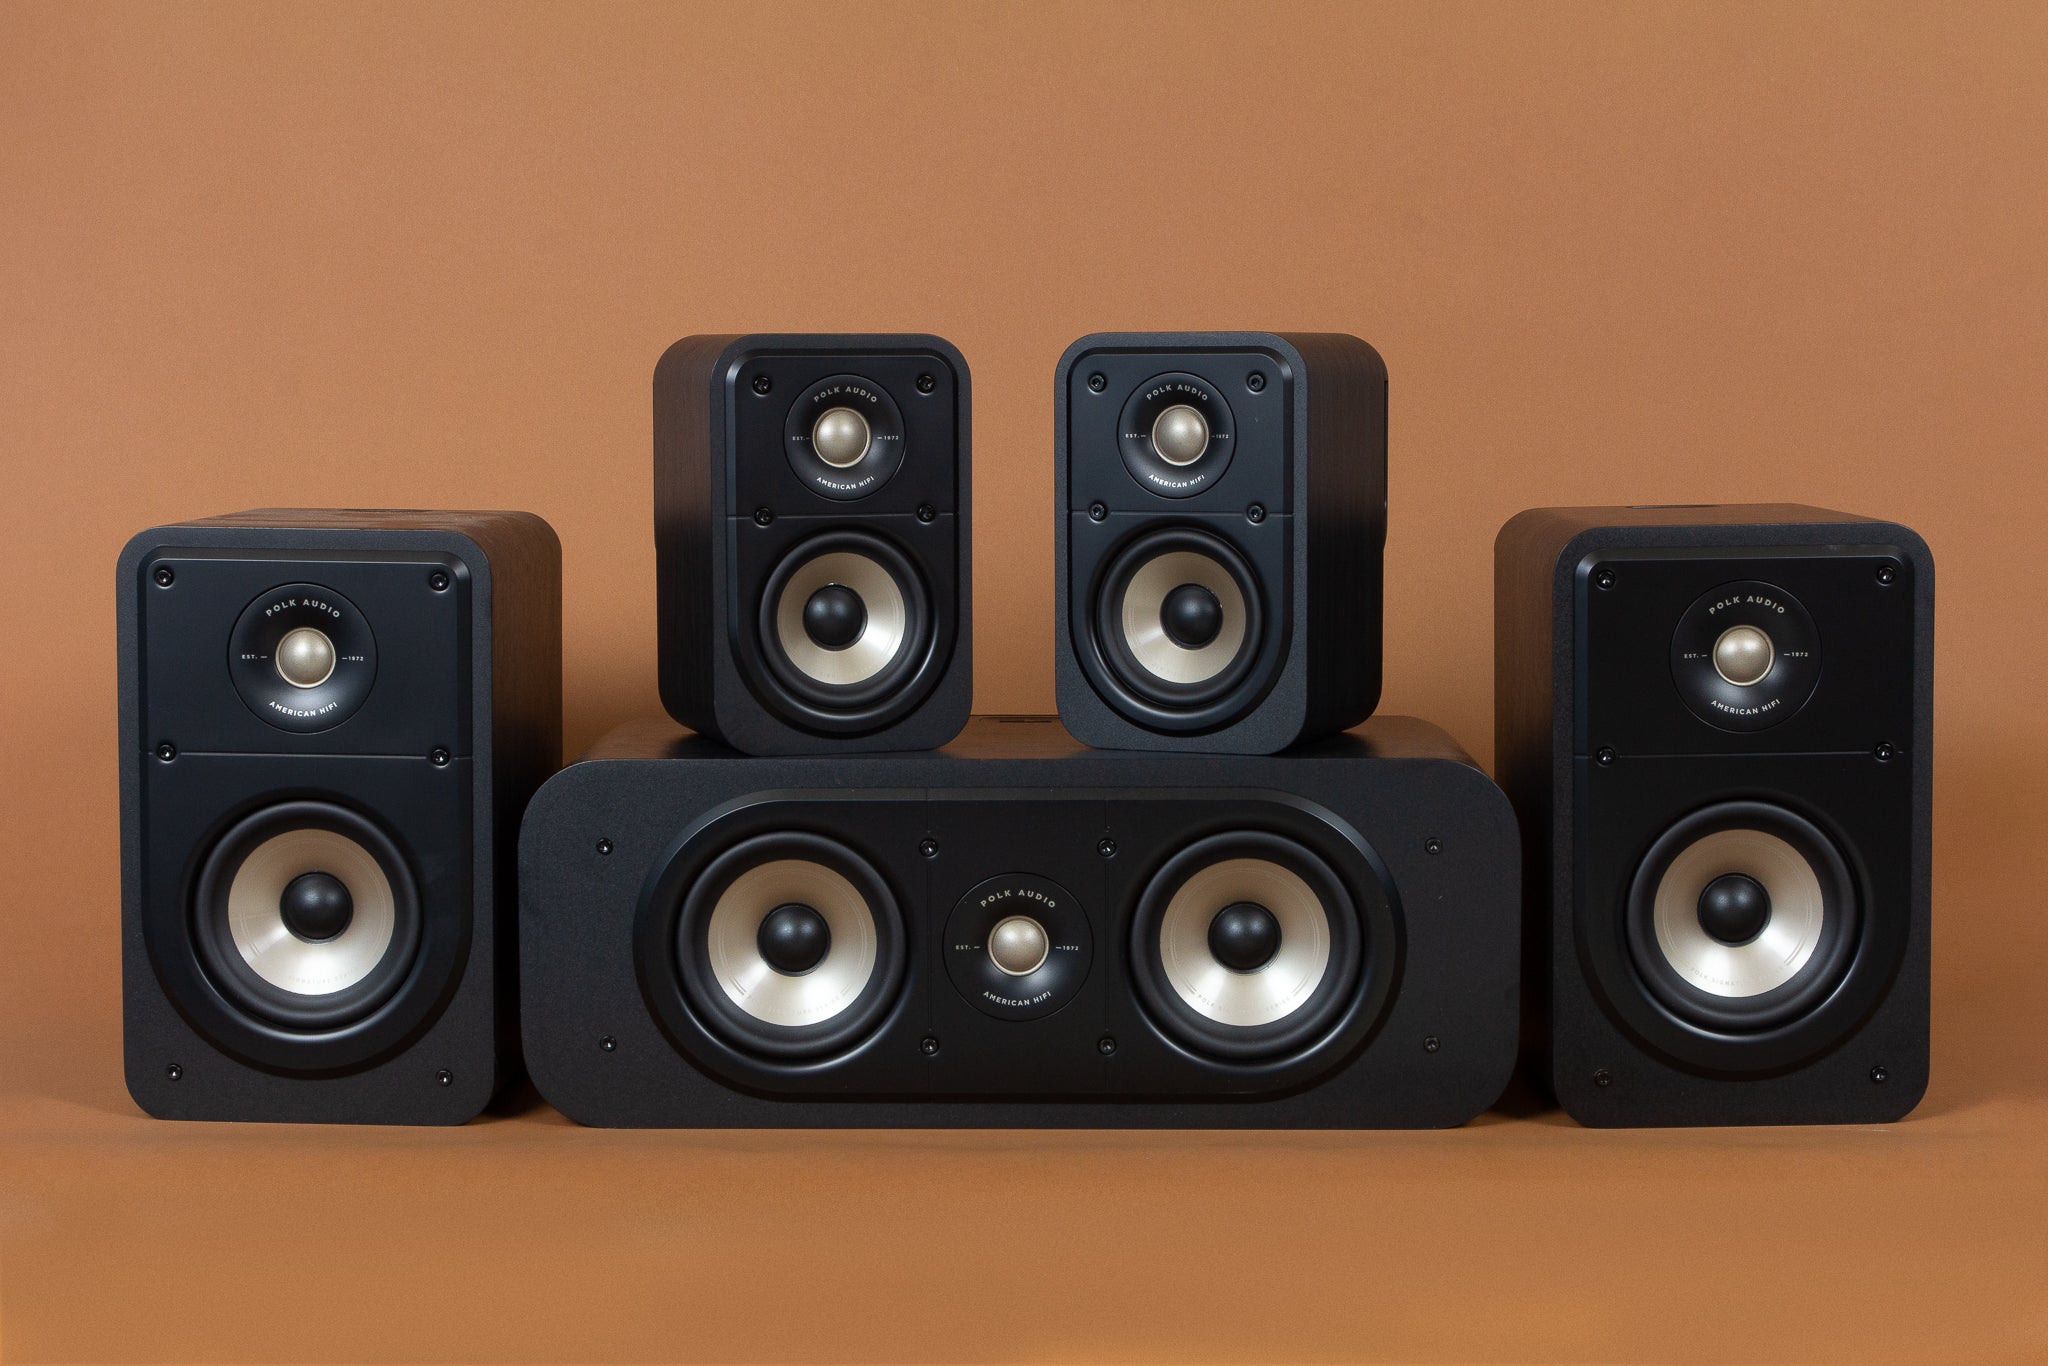 What Is the Difference Between a Hi-Fi And Home Theater System?